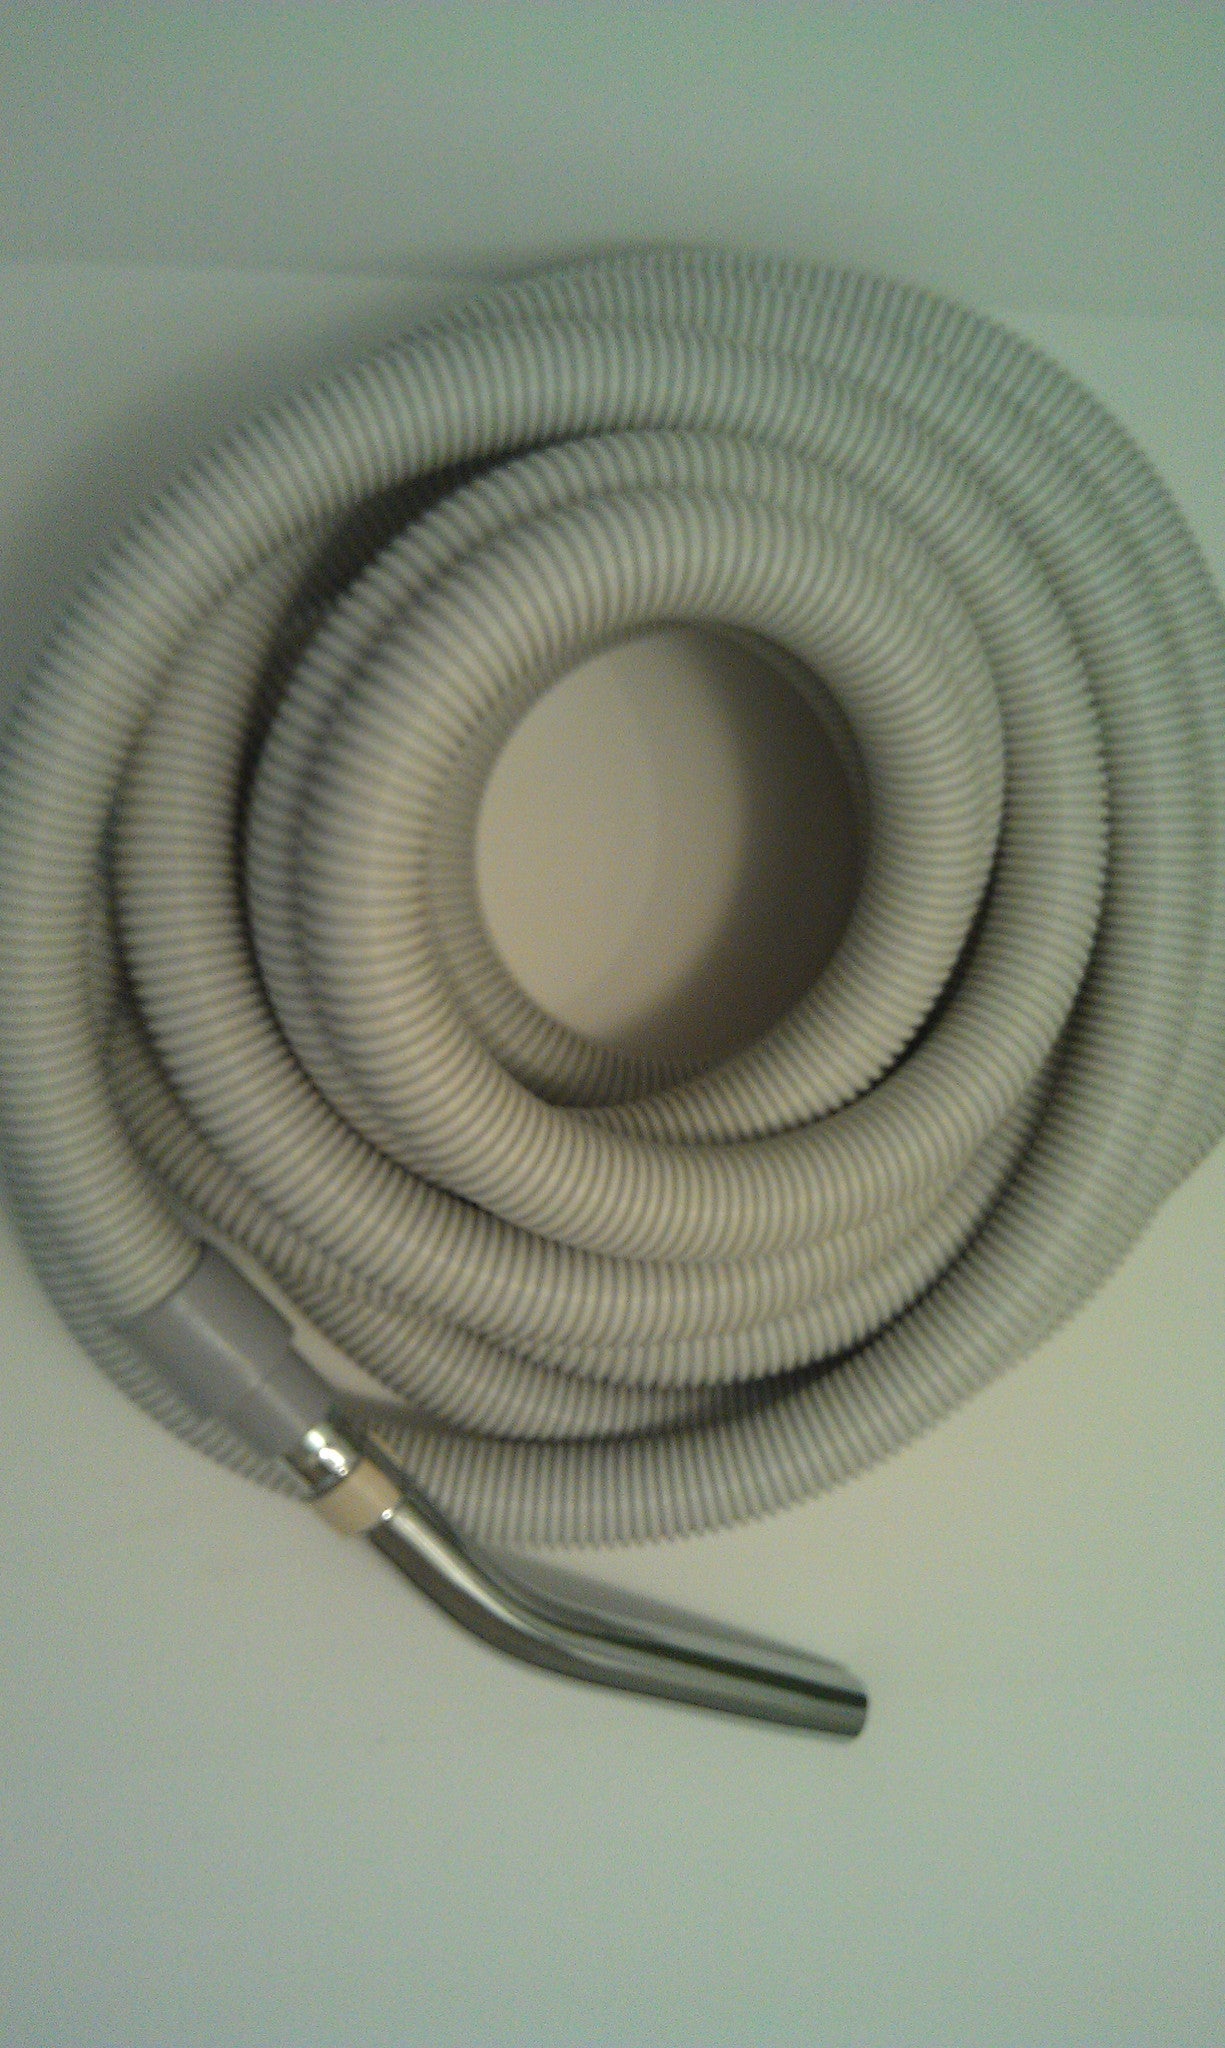 50ft Crushproof Basic Central Vacuum Cleaner Hose fits Most Central Vacuum Systems, Part 64477.